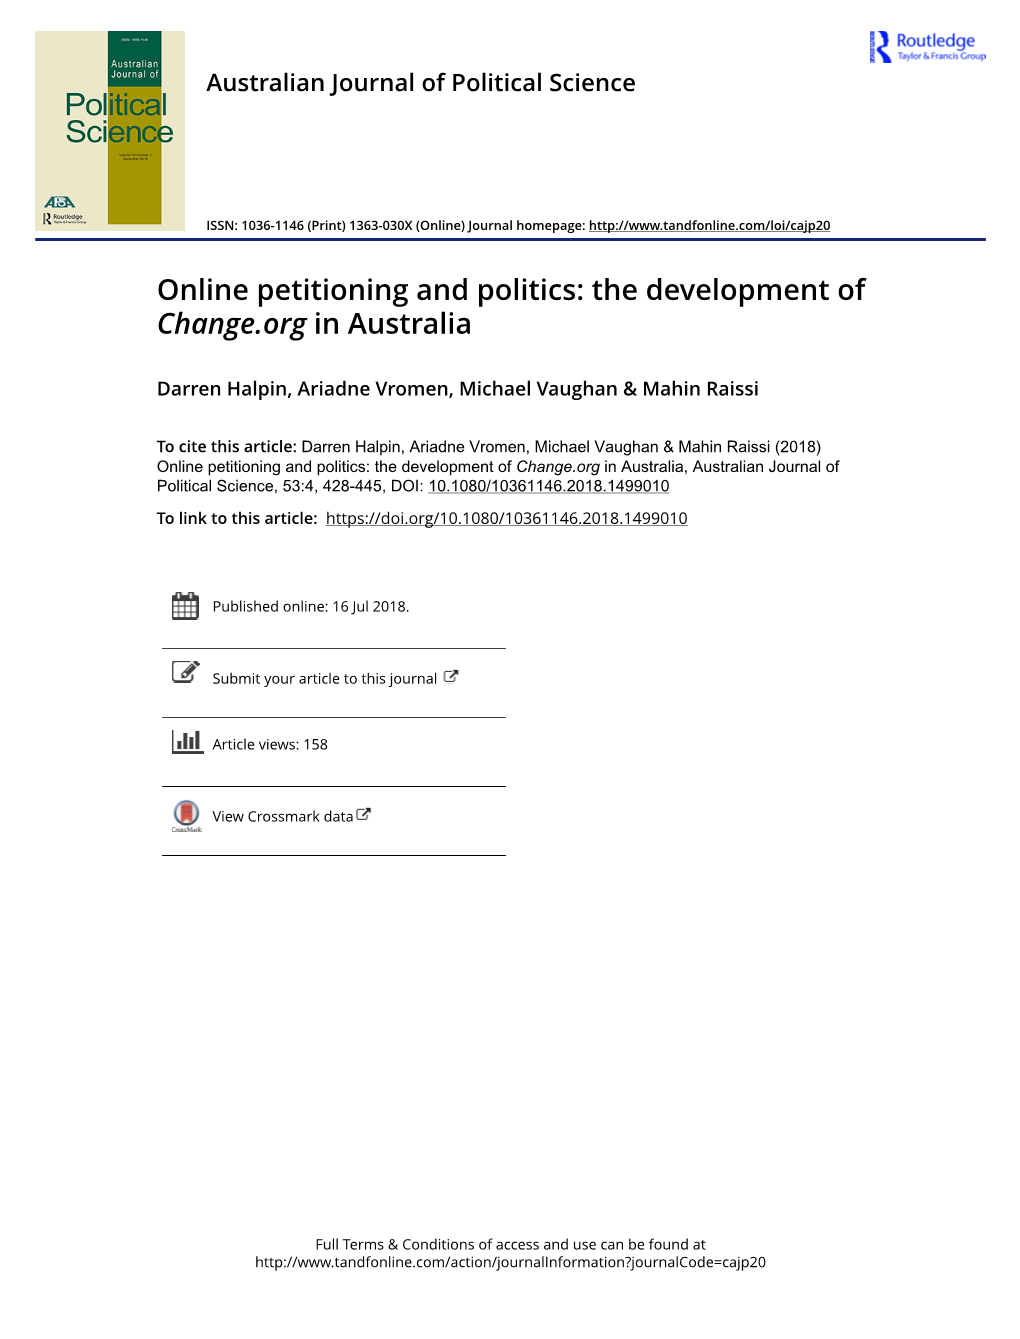 Online Petitioning and Politics: the Development of Change.Org in Australia